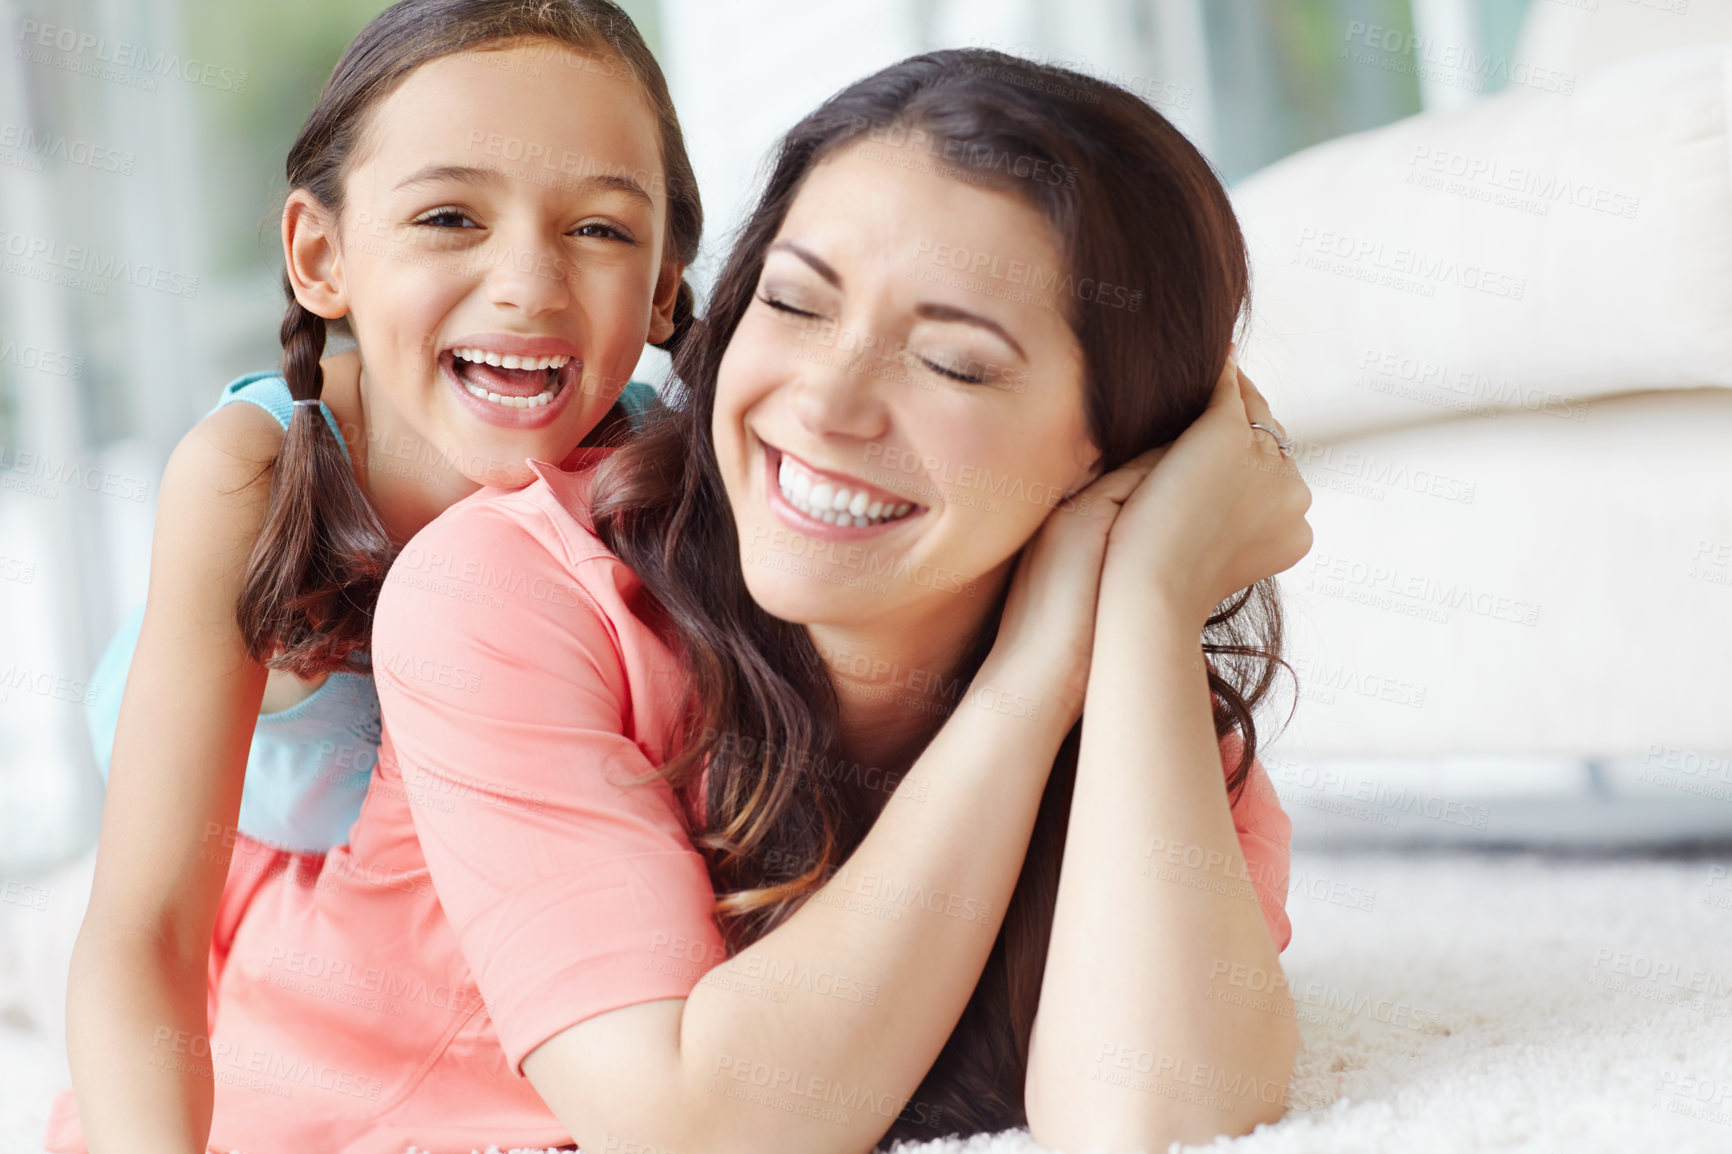 Buy stock photo Cute young mother and daughter relaxing while lying on the floor at home